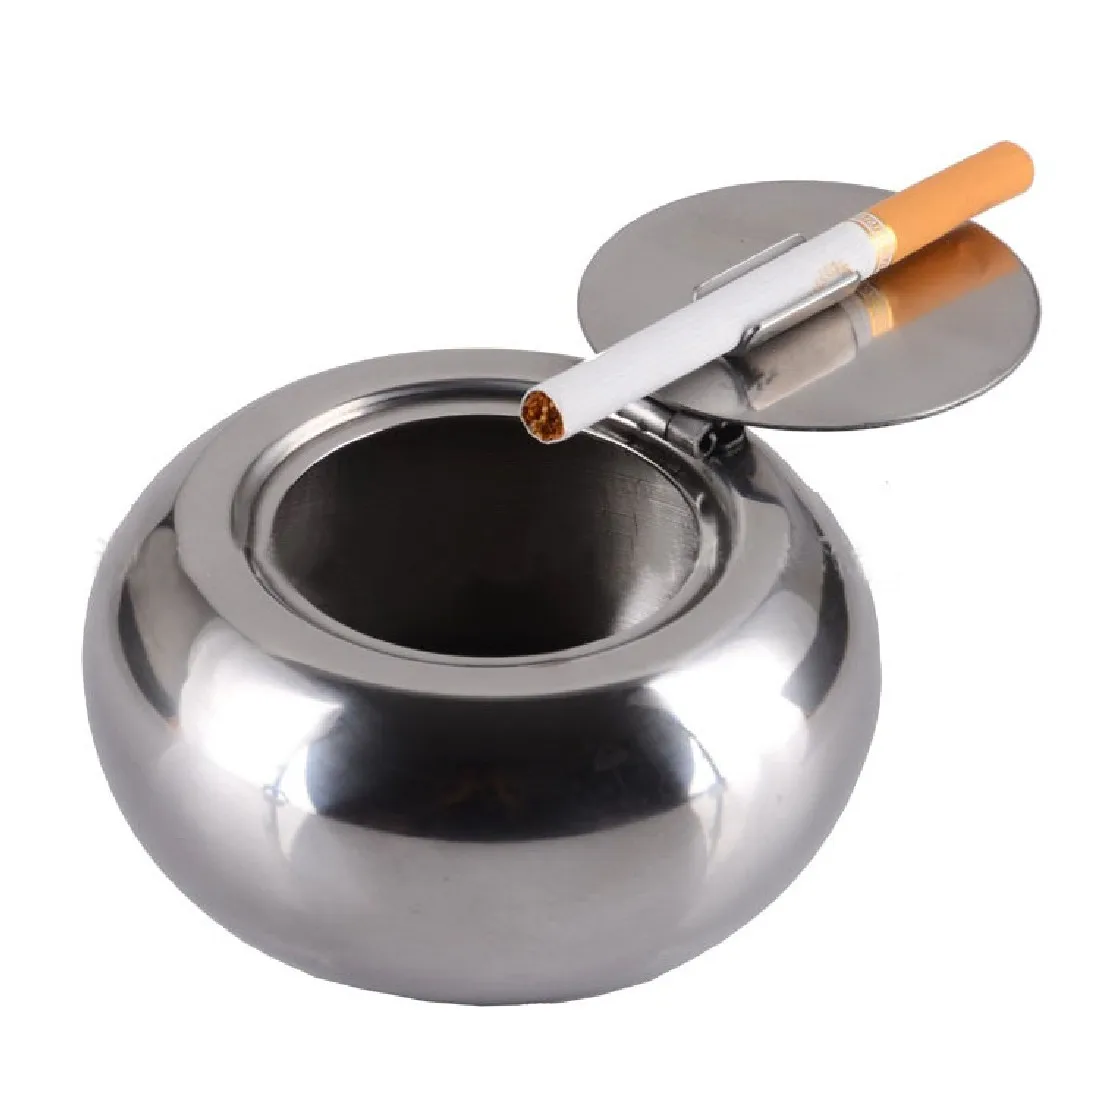 

Home Decoration Drum Shaped Ashtray Cigarette Cigar Smoking Smoke Ash Tray Stainless Steel